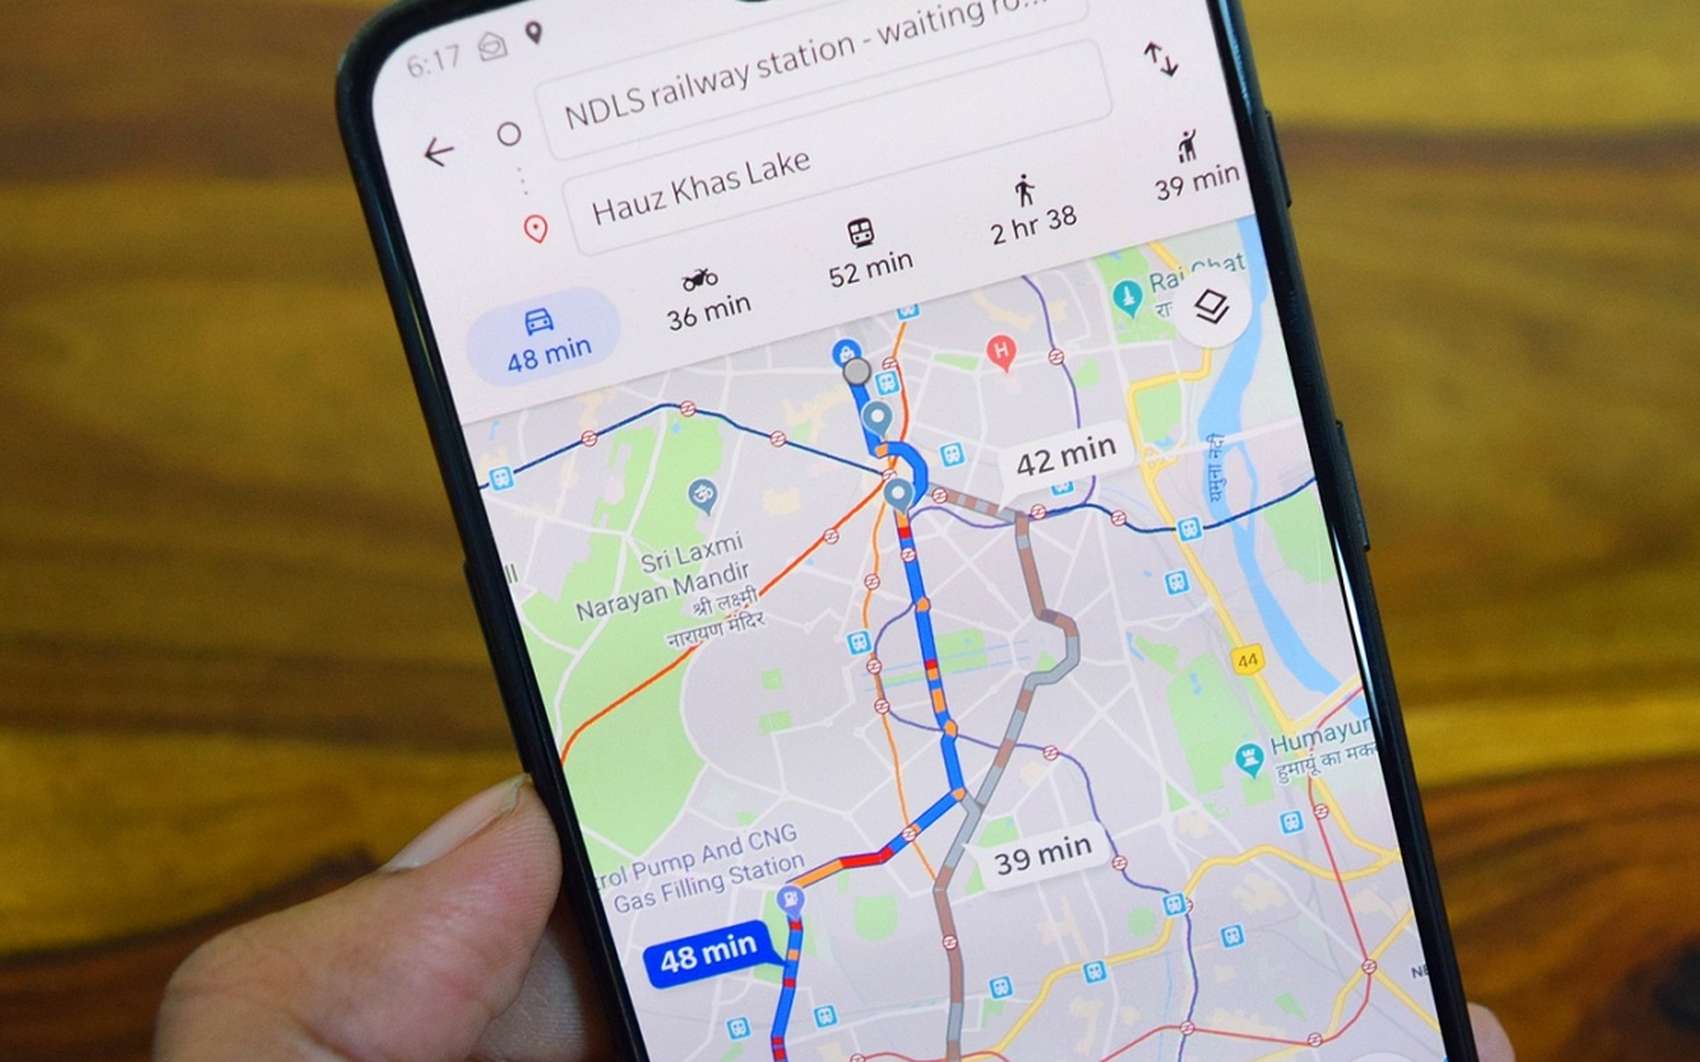 How do you prevent Google Maps from determining your location?